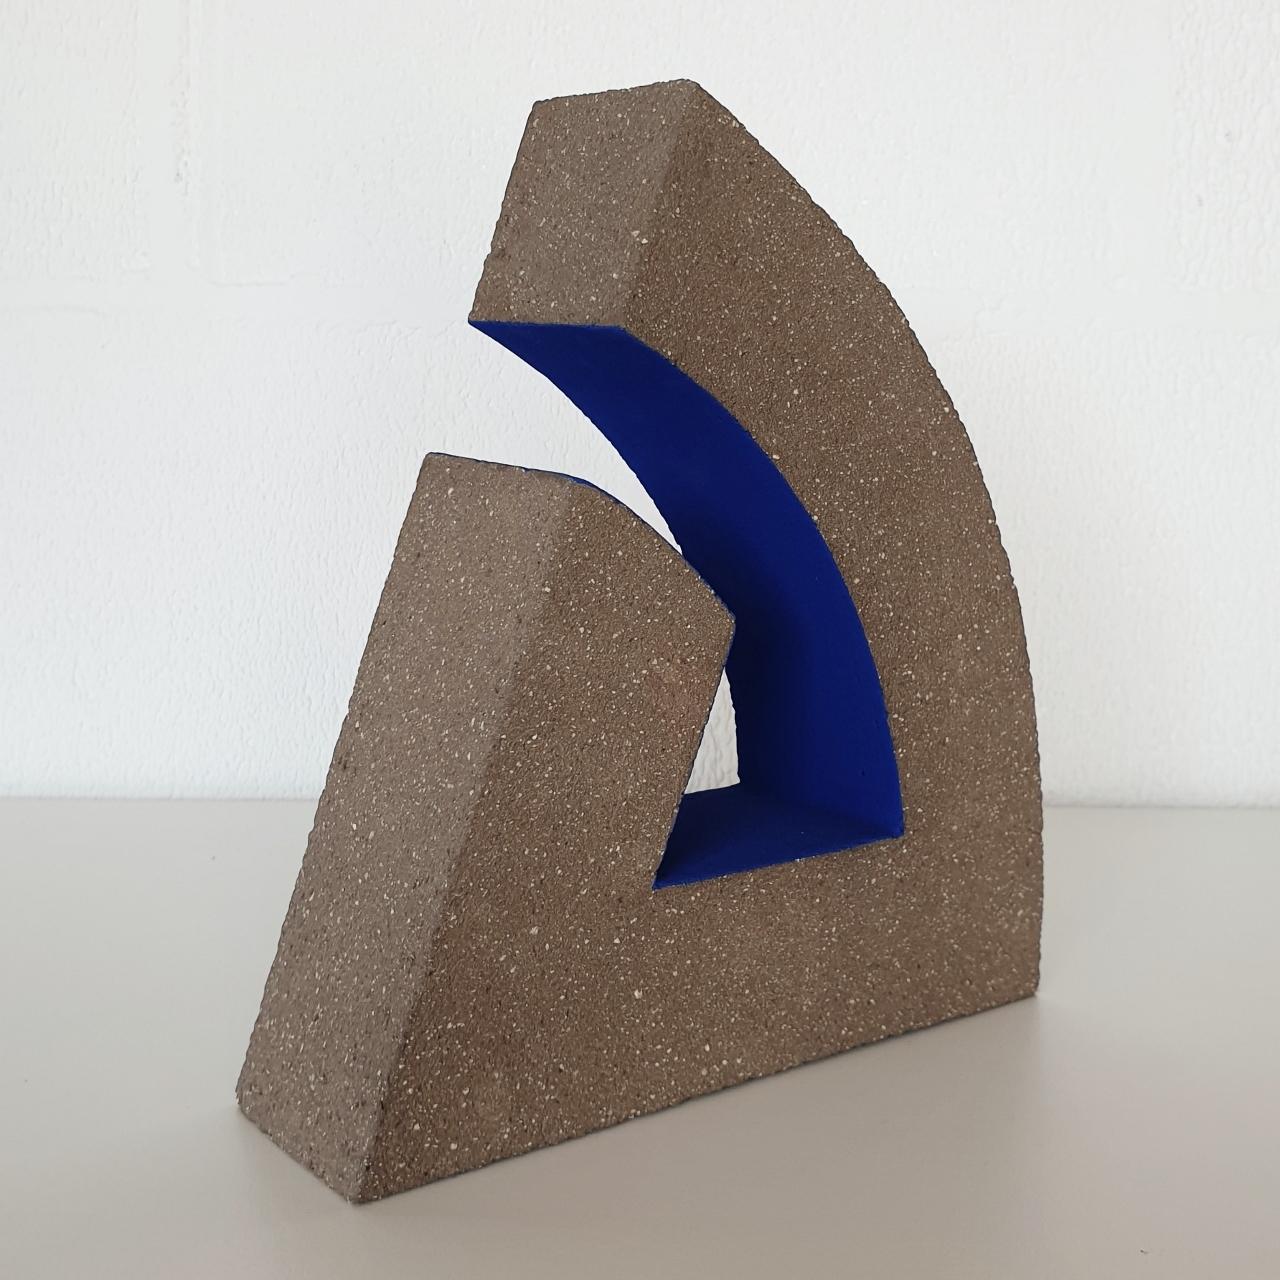 abstract geometric sculpture